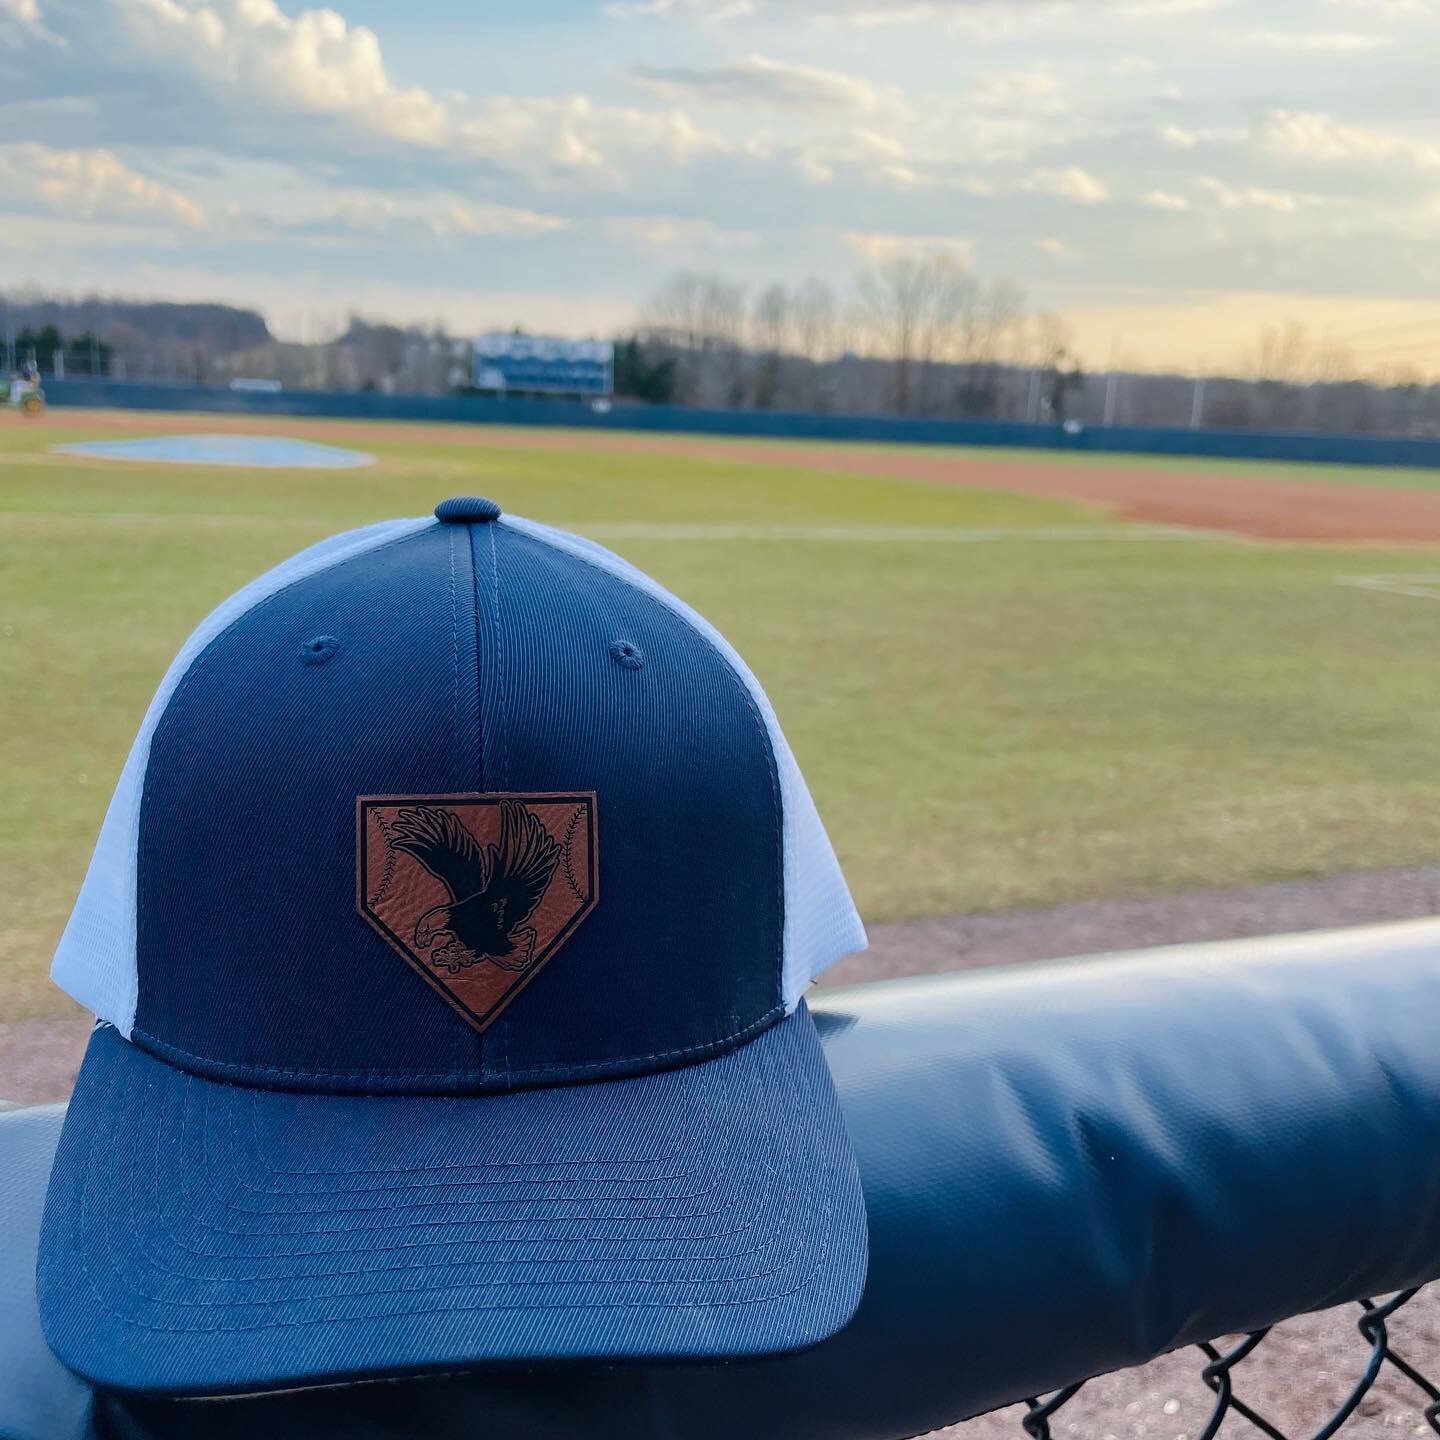 Your ideas 🤝 Our craftsmanship 

@umwbaseball wanted a simple, but branded design for the hats they already had. We helped design and make their idea come to life! 🧢

#MuddyFeetGraphics | #Leaveatrail